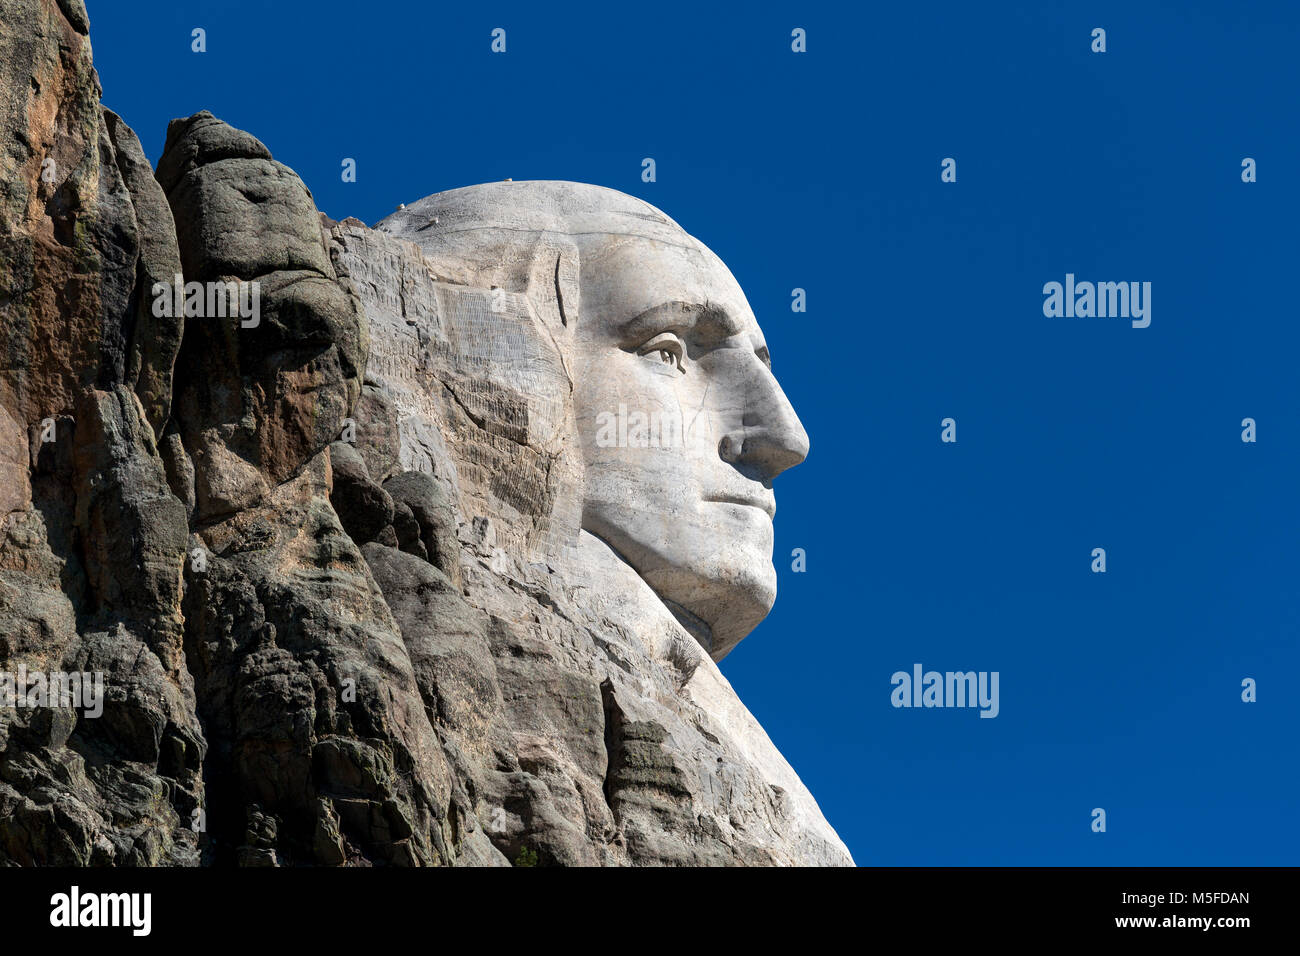 SD00032-00...SOUTH DAKOTA - Presedent Georg Washington carved on a mountain side in Mount Rushmore National Memorial. Stock Photo